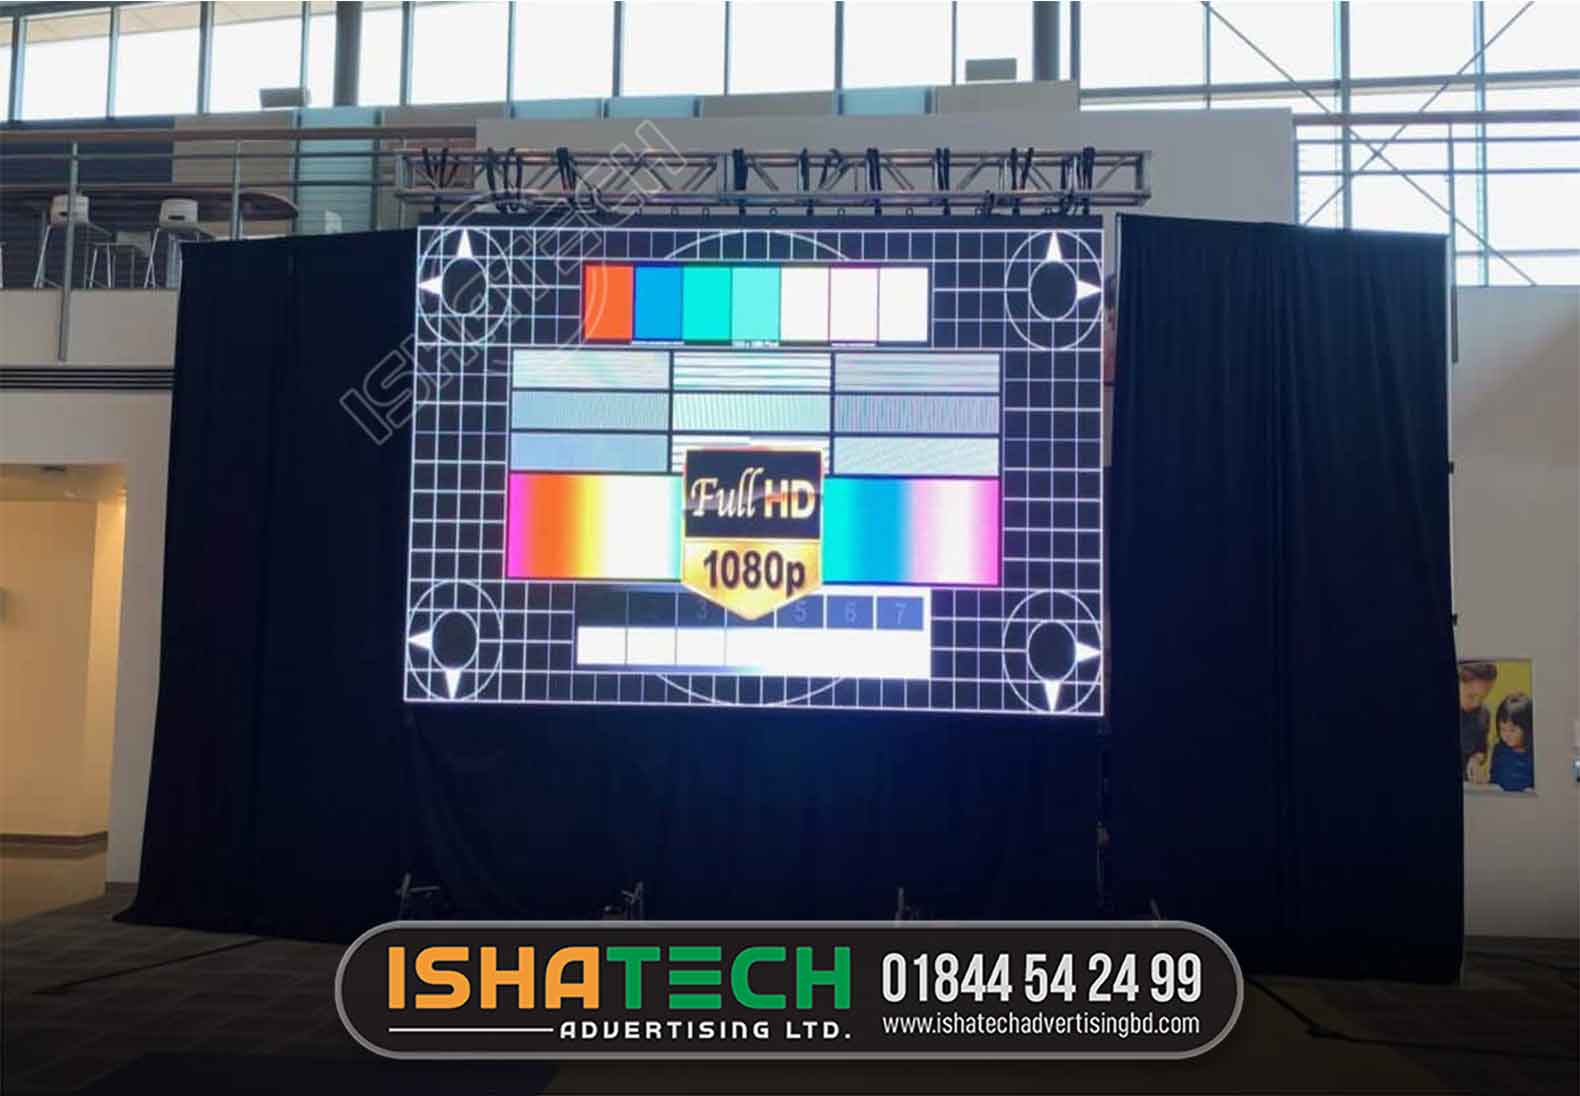 Shopping Mall Outdoor Building Wall Mounted Advertising Billboard Led Display Screen Structure, LED DISPLAY MANUFACTURER